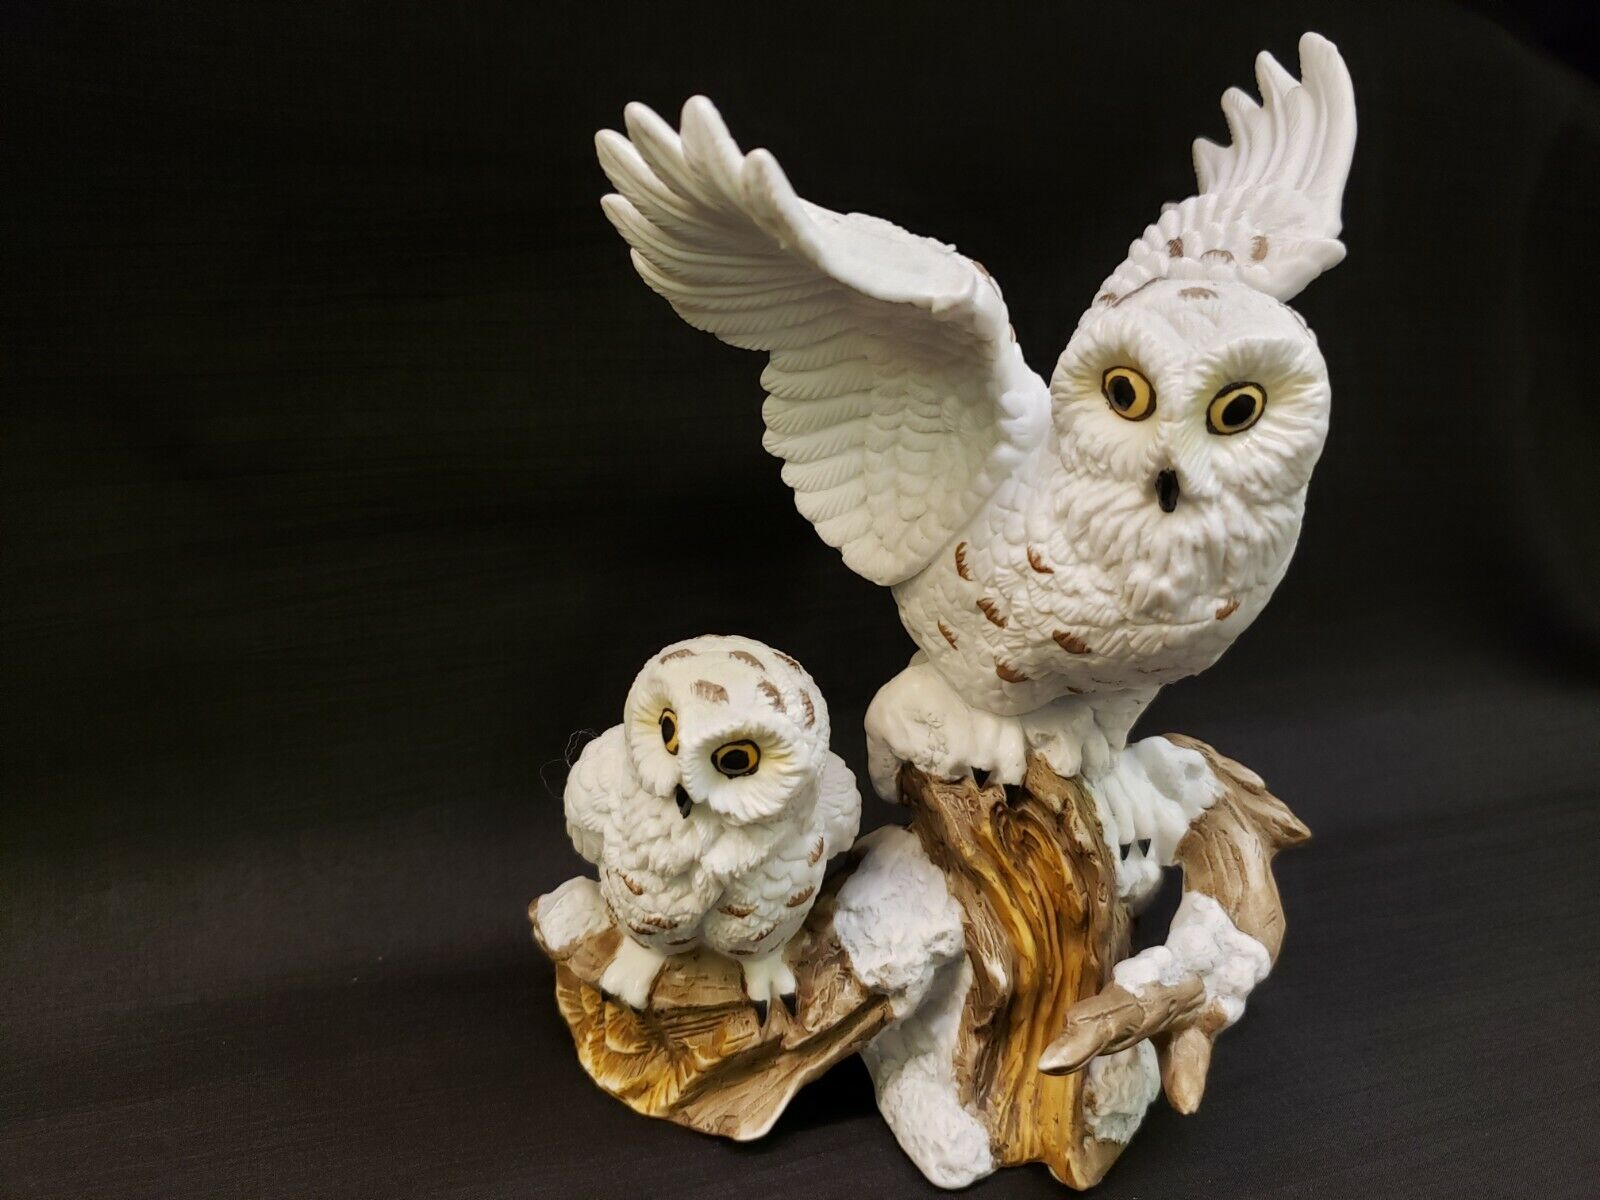 Regency Giftware 1993 Snowy Owl and Baby Porcelain Figurine